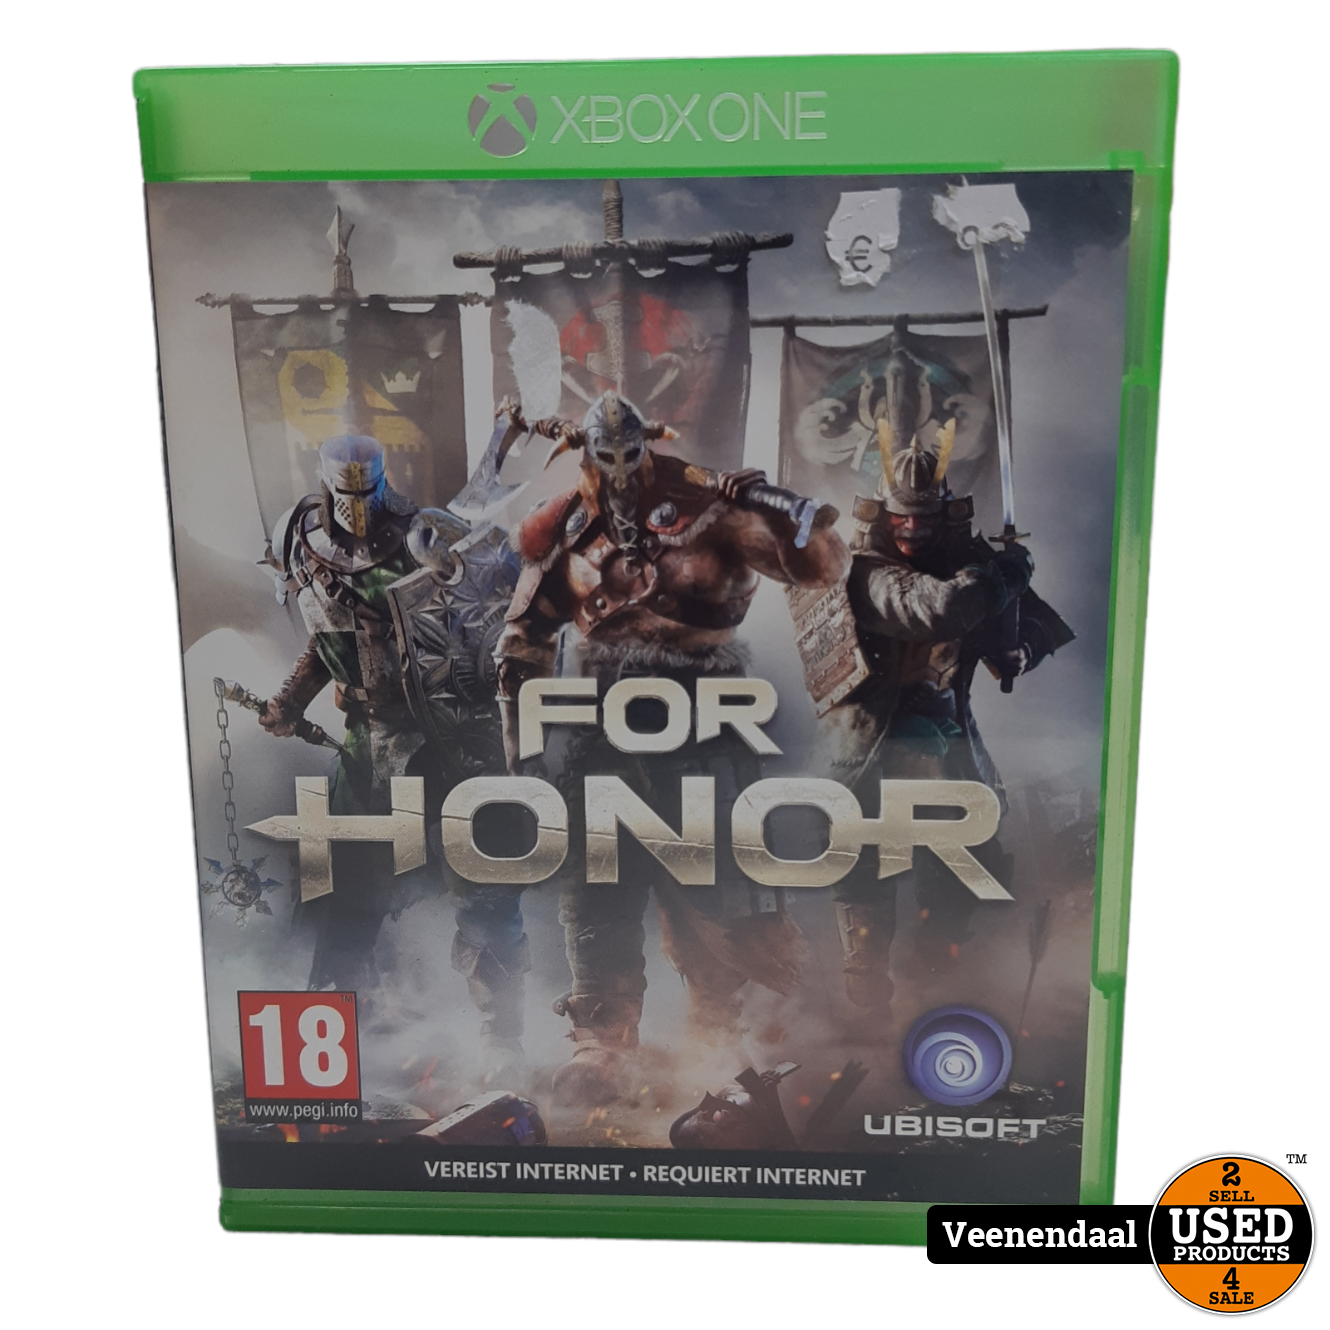 zwaartekracht Cornwall Basistheorie For Honor - Xbox One Game - Used Products Veenendaal